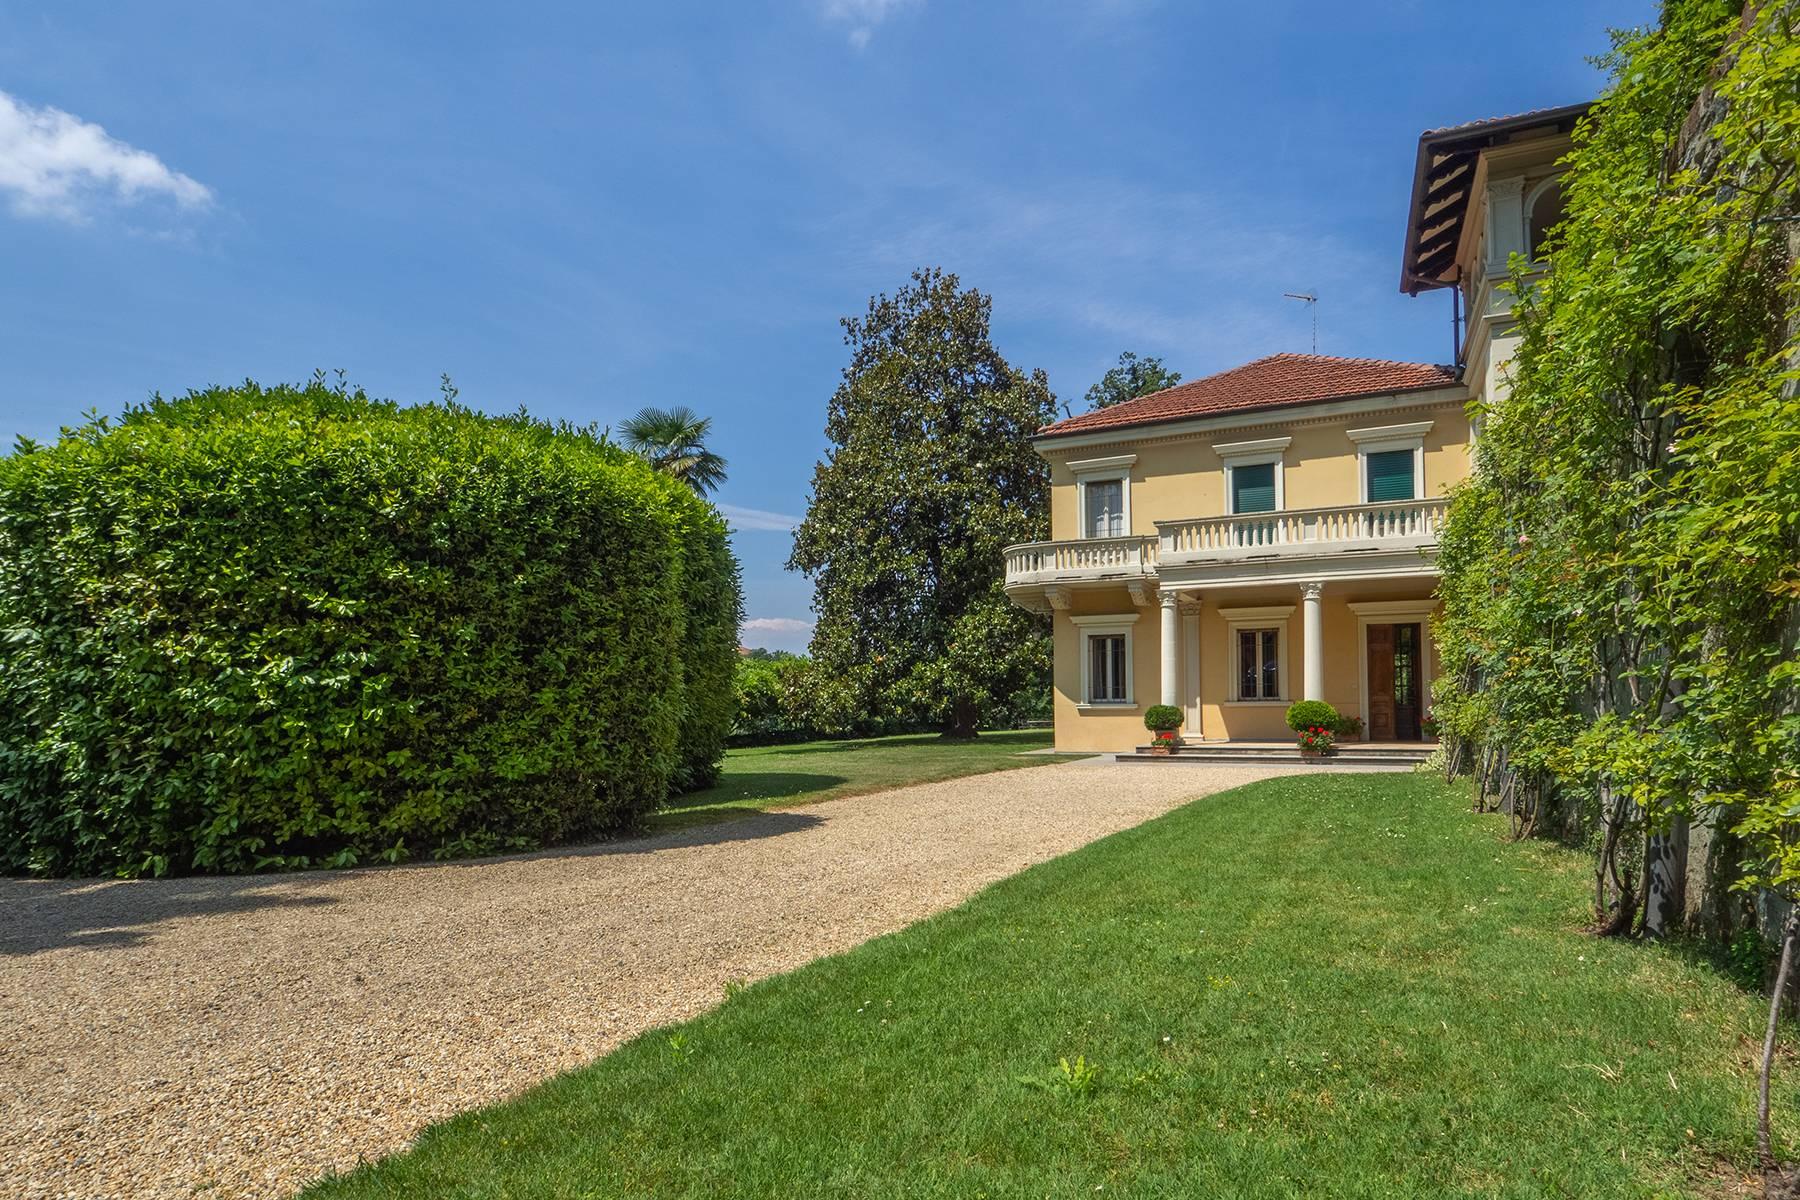 Exquisite villa with swimming pool in the hill of Turin - 4